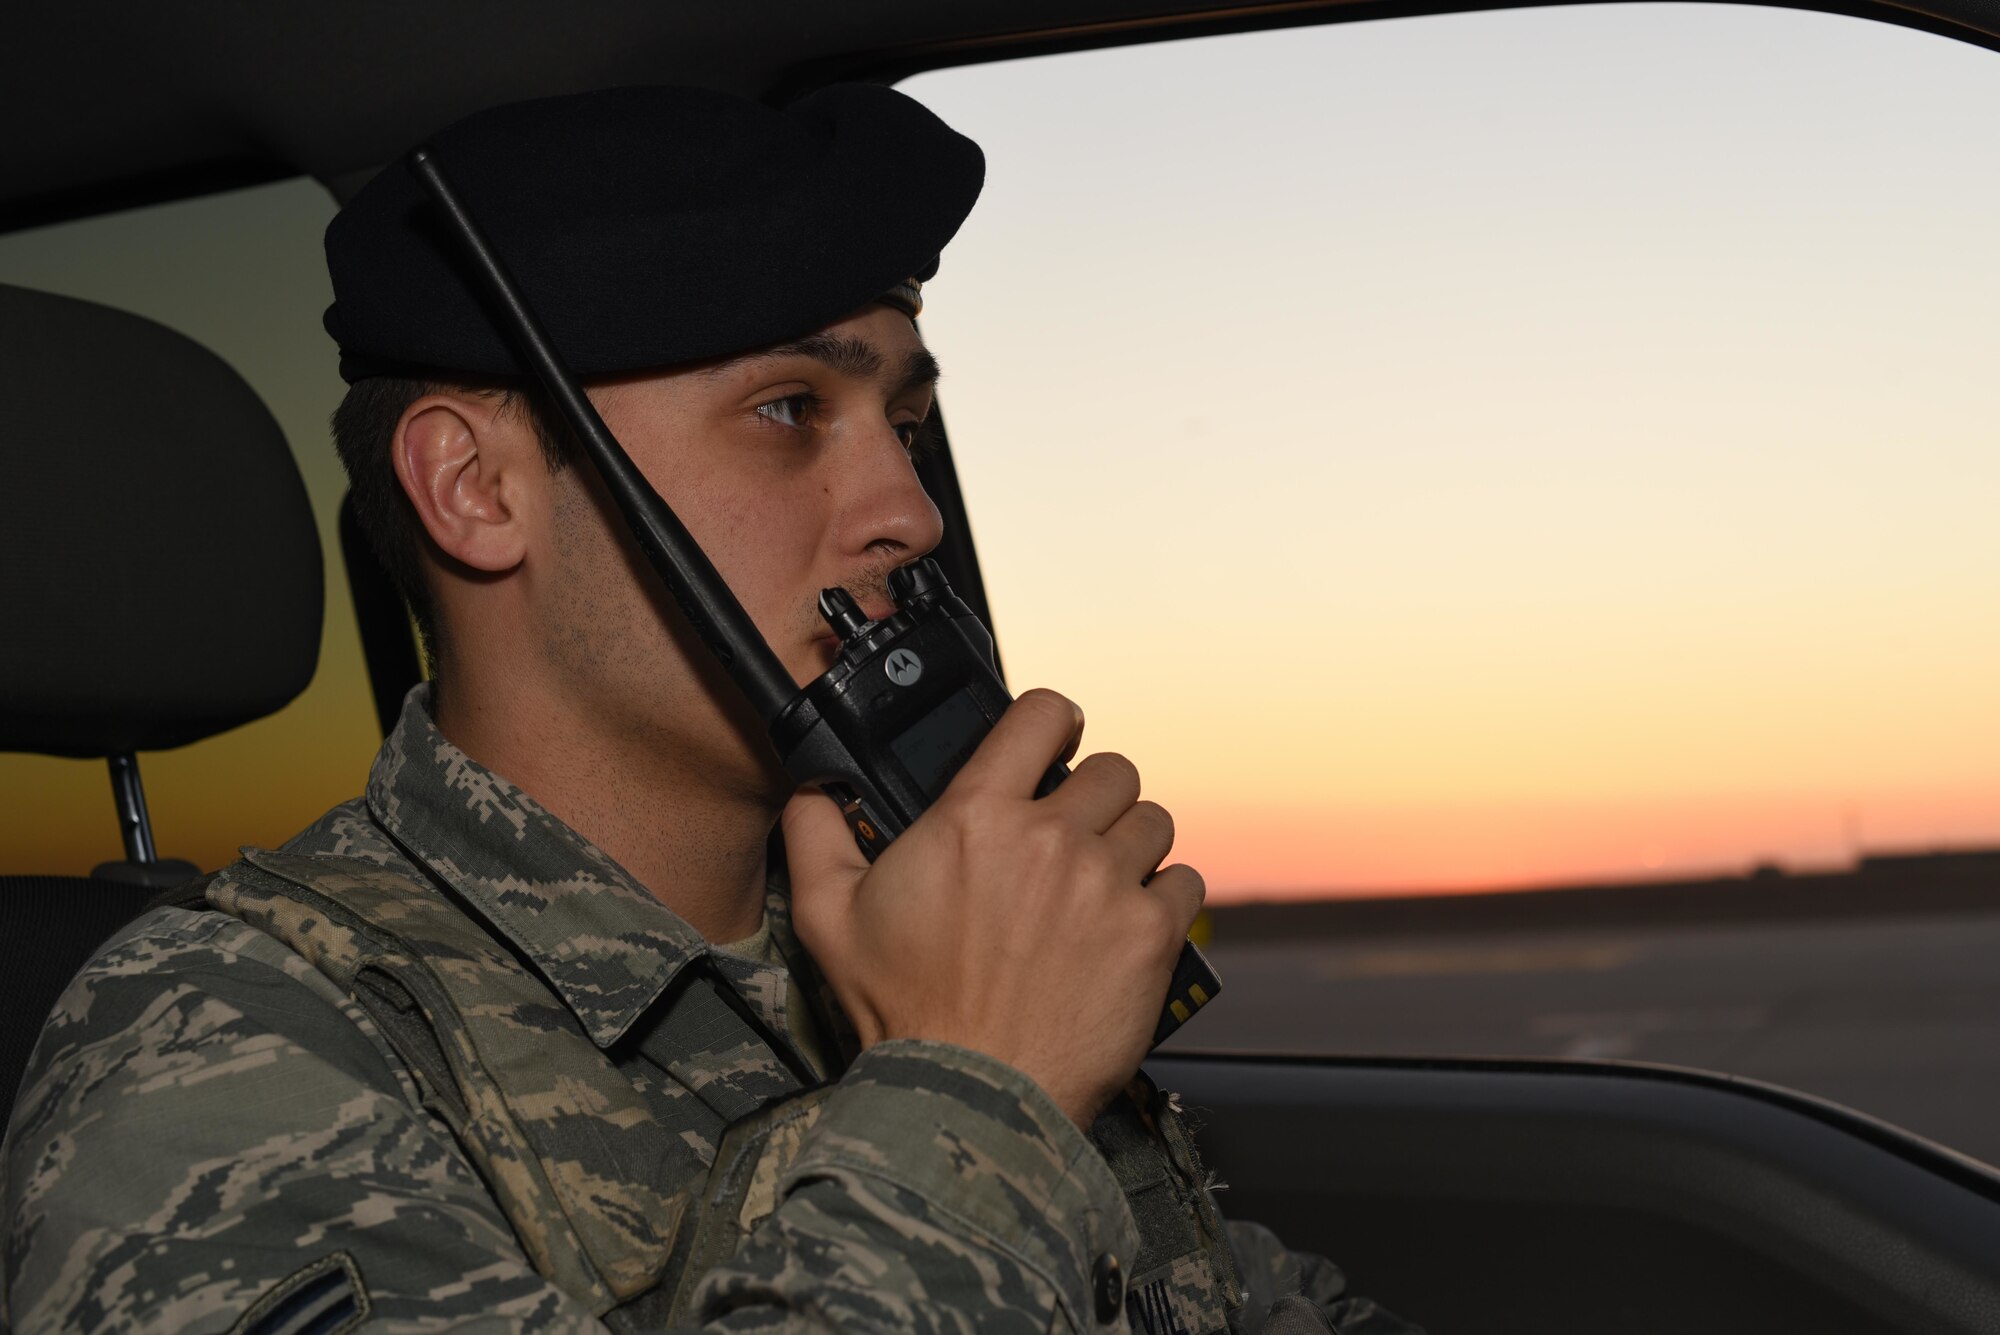 Airman 1st Class Tayler Sonnevil, 22nd Security Forces Squadron patrolman, radios into the SFS control center March 24, 2020, at McConnell Air Force Base, Kansas. Flight line security measures require Defenders to challenge personnel within restricted areas to validate their authorization. (U.S. Air Force photo by Senior Airman Alexi Bosarge)